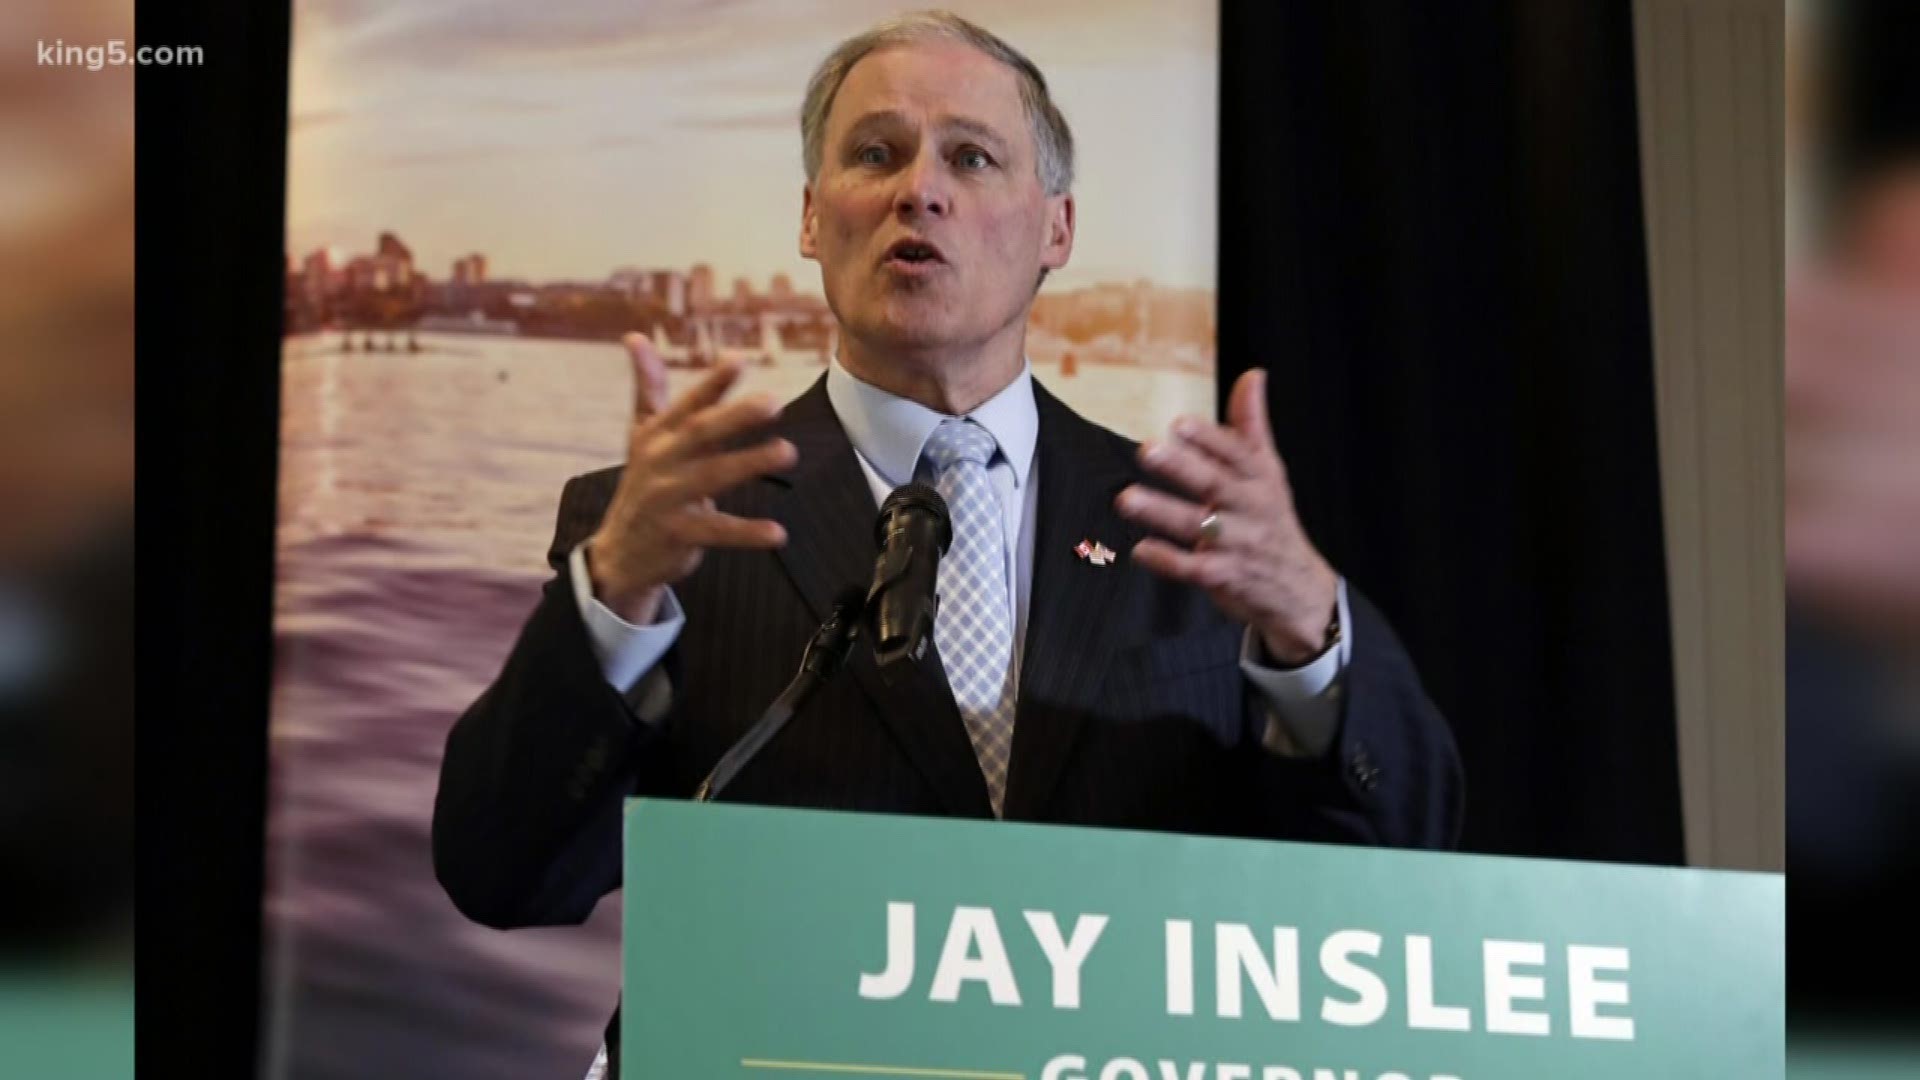 Washington Governor Jay Inslee is expected to announce a run for the presidency by the end of the week. Multiple political sources say the announcement could come as early as Friday. It's prompting reaction from both sides of the aisle and speculation about what's next for other potential candidates. KING 5's Chris Daniels reports.